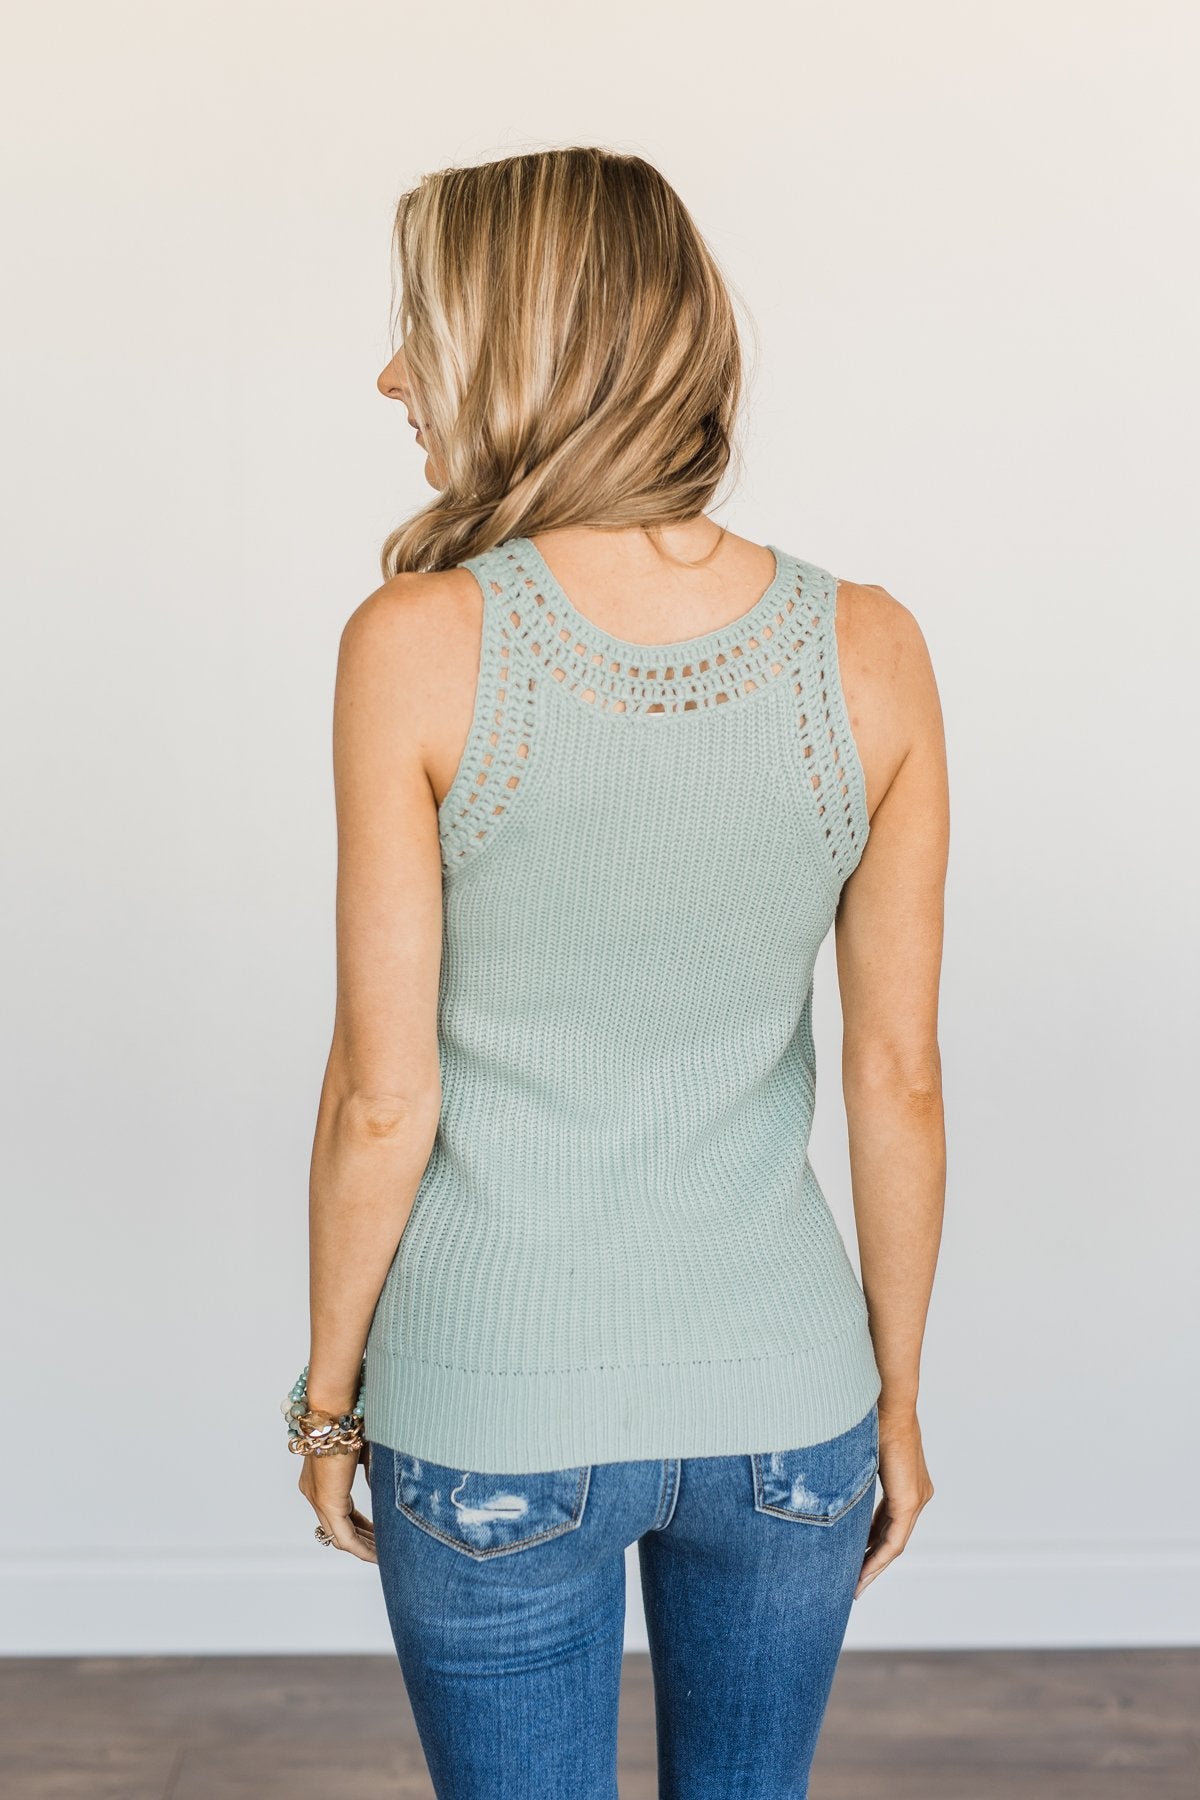 Kissed By The Sun Knit Tank Top- Soft Mint Blue